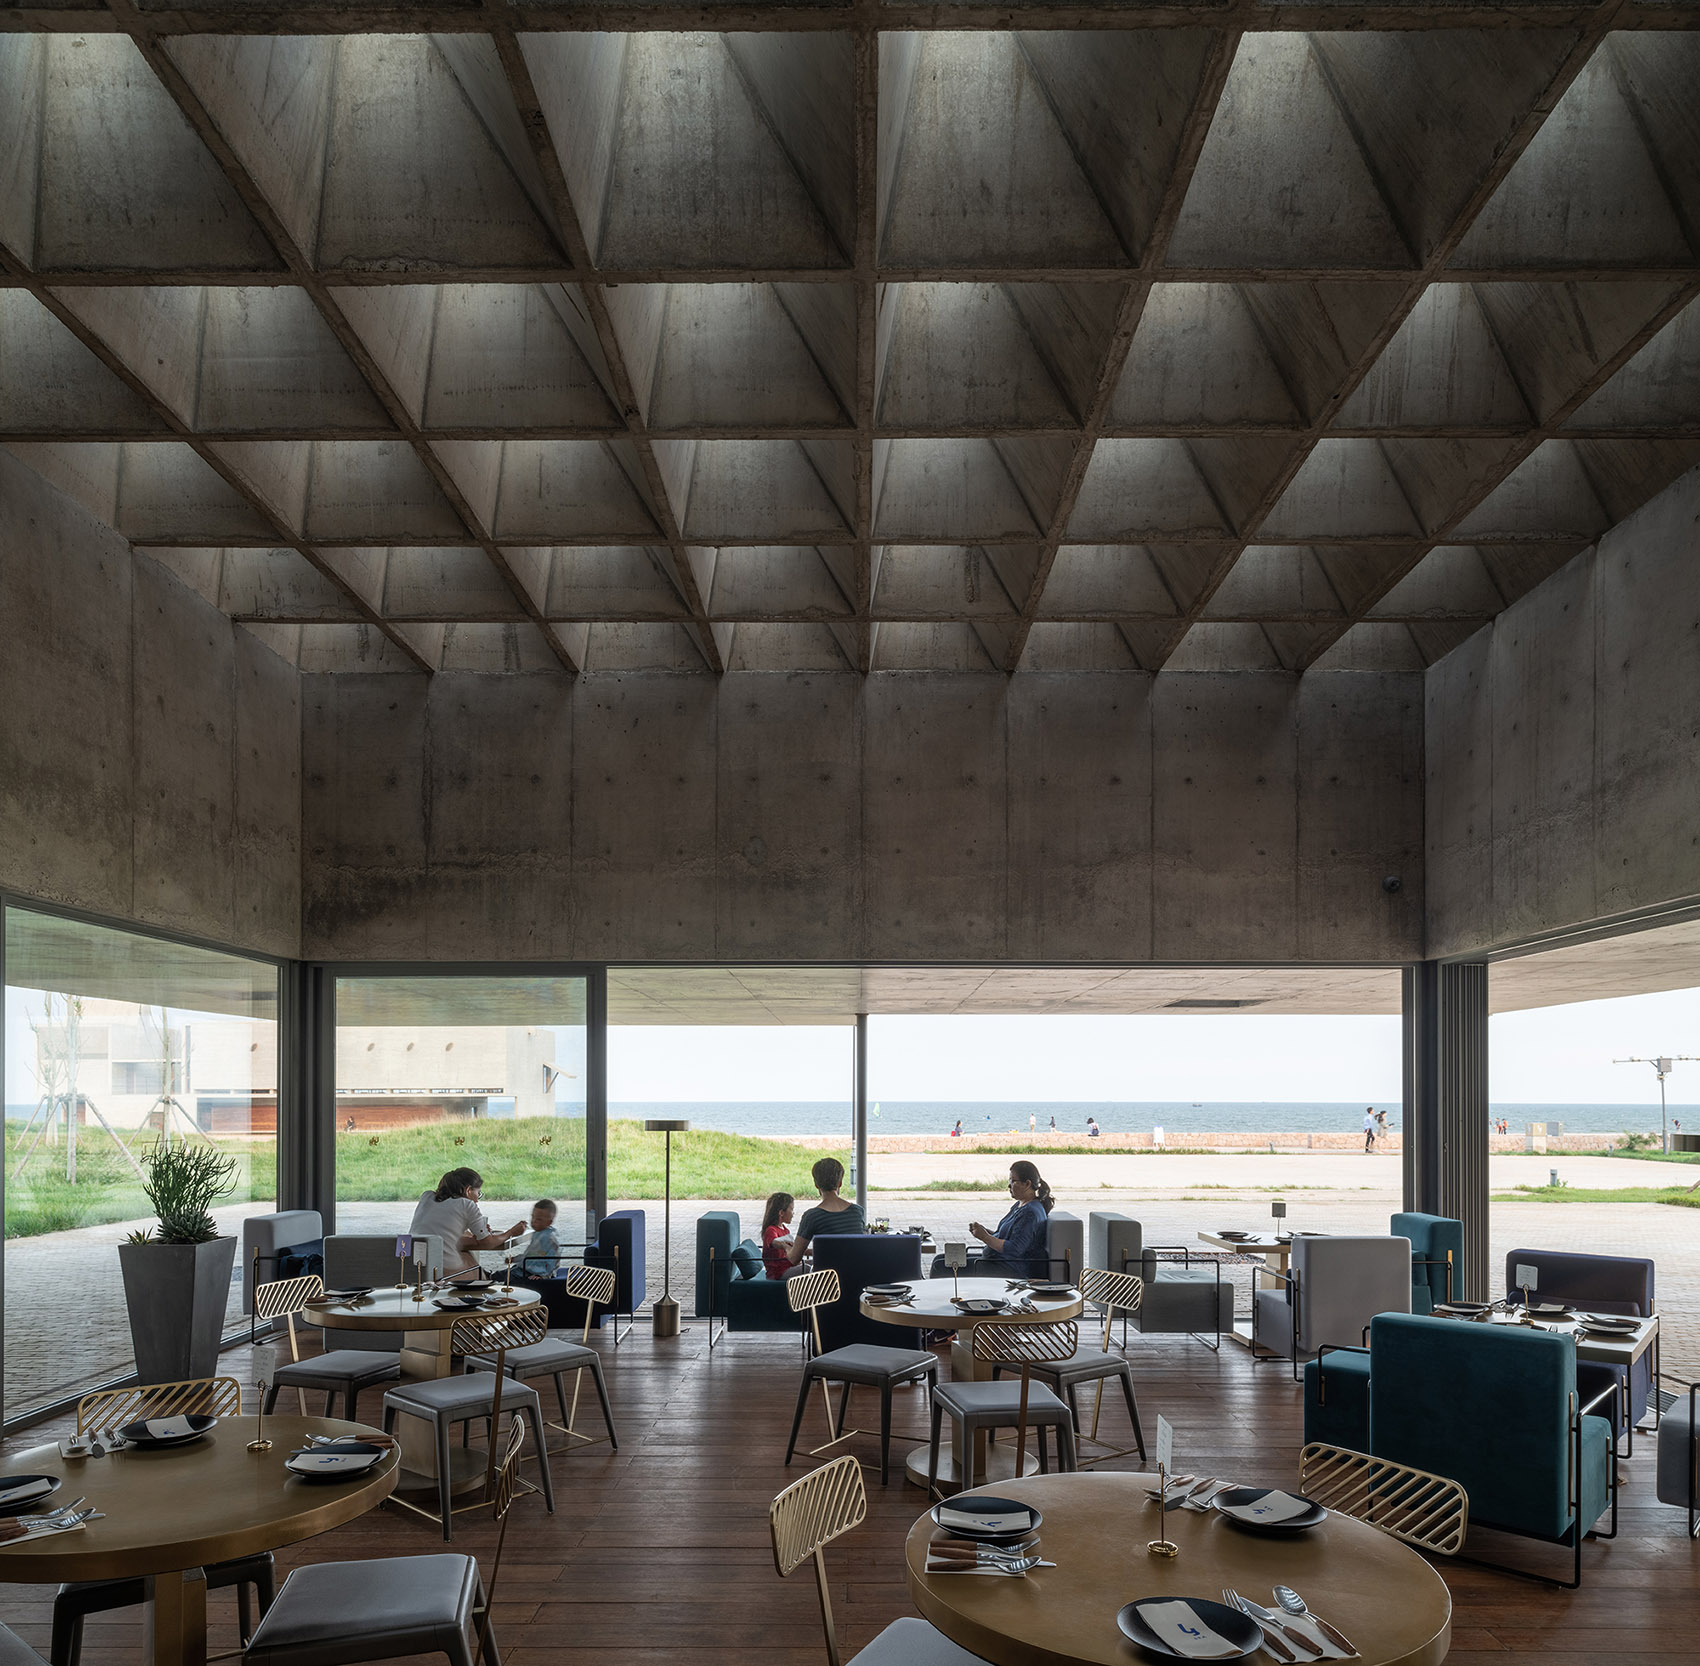 020-restaurant-y-sea-china-by-vector-architects.jpg